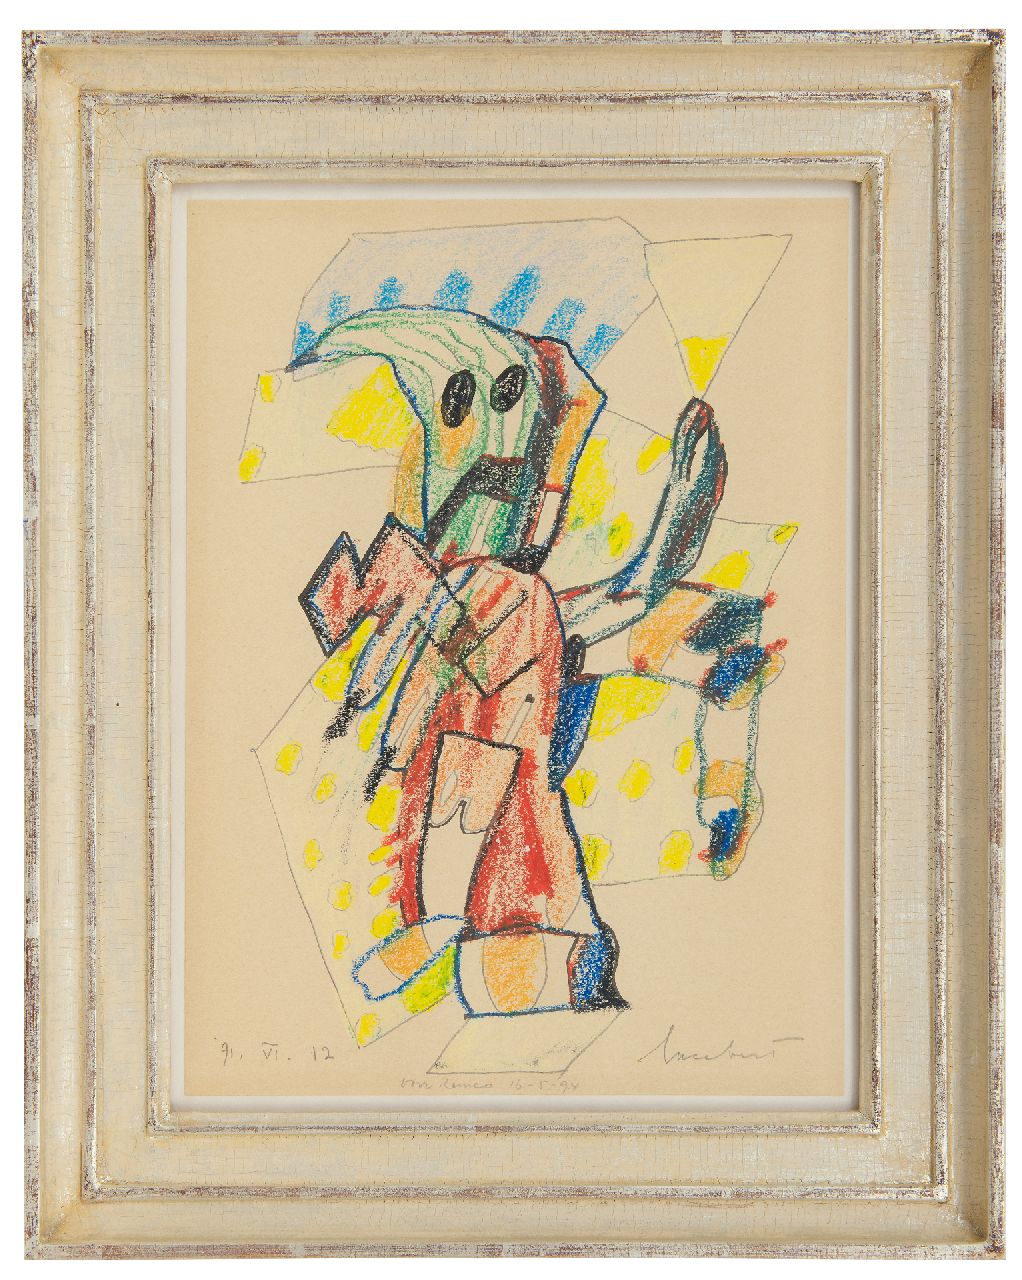 Lucebert (Lubertus Jacobus Swaanswijk)   | Lucebert (Lubertus Jacobus Swaanswijk) | Watercolours and drawings offered for sale | Untitled, graphite and watercolor on paper 32.2 x 23.7 cm, signed l.r. and dated 91.VI.12